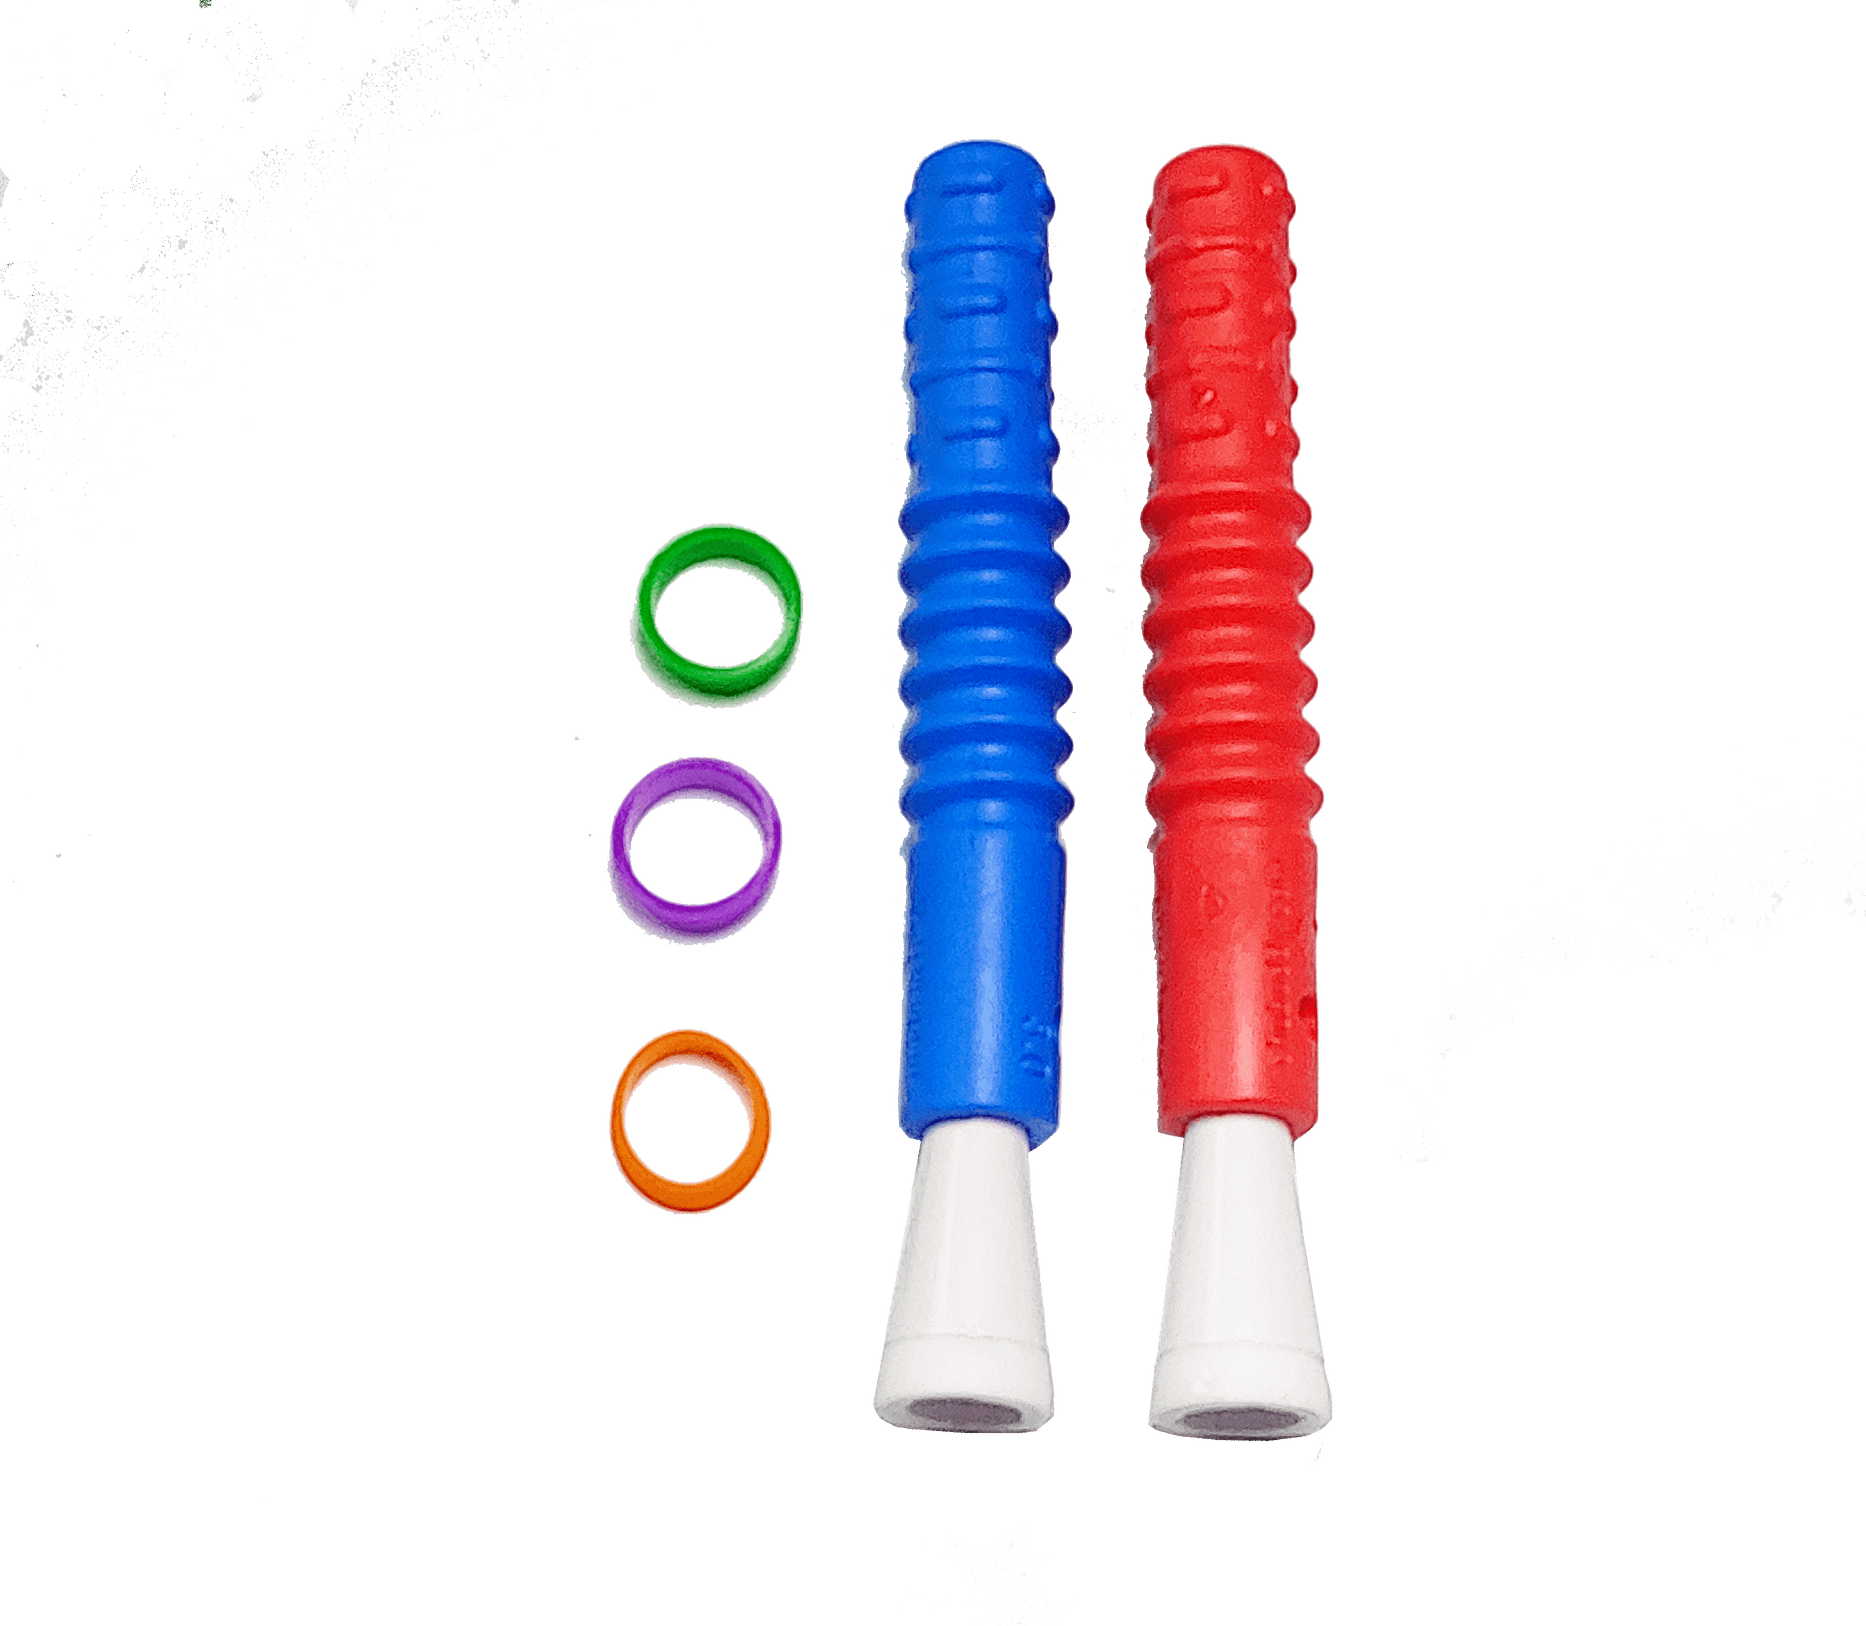 VibraZilla Tube Head Replacement Pack- includes 1 Red Zilla Jr and 1 Blue Zilla Jr head replacements, 3 silicone ID bands VIBRZIL-REPLC-RB Chubuddy, LLC 